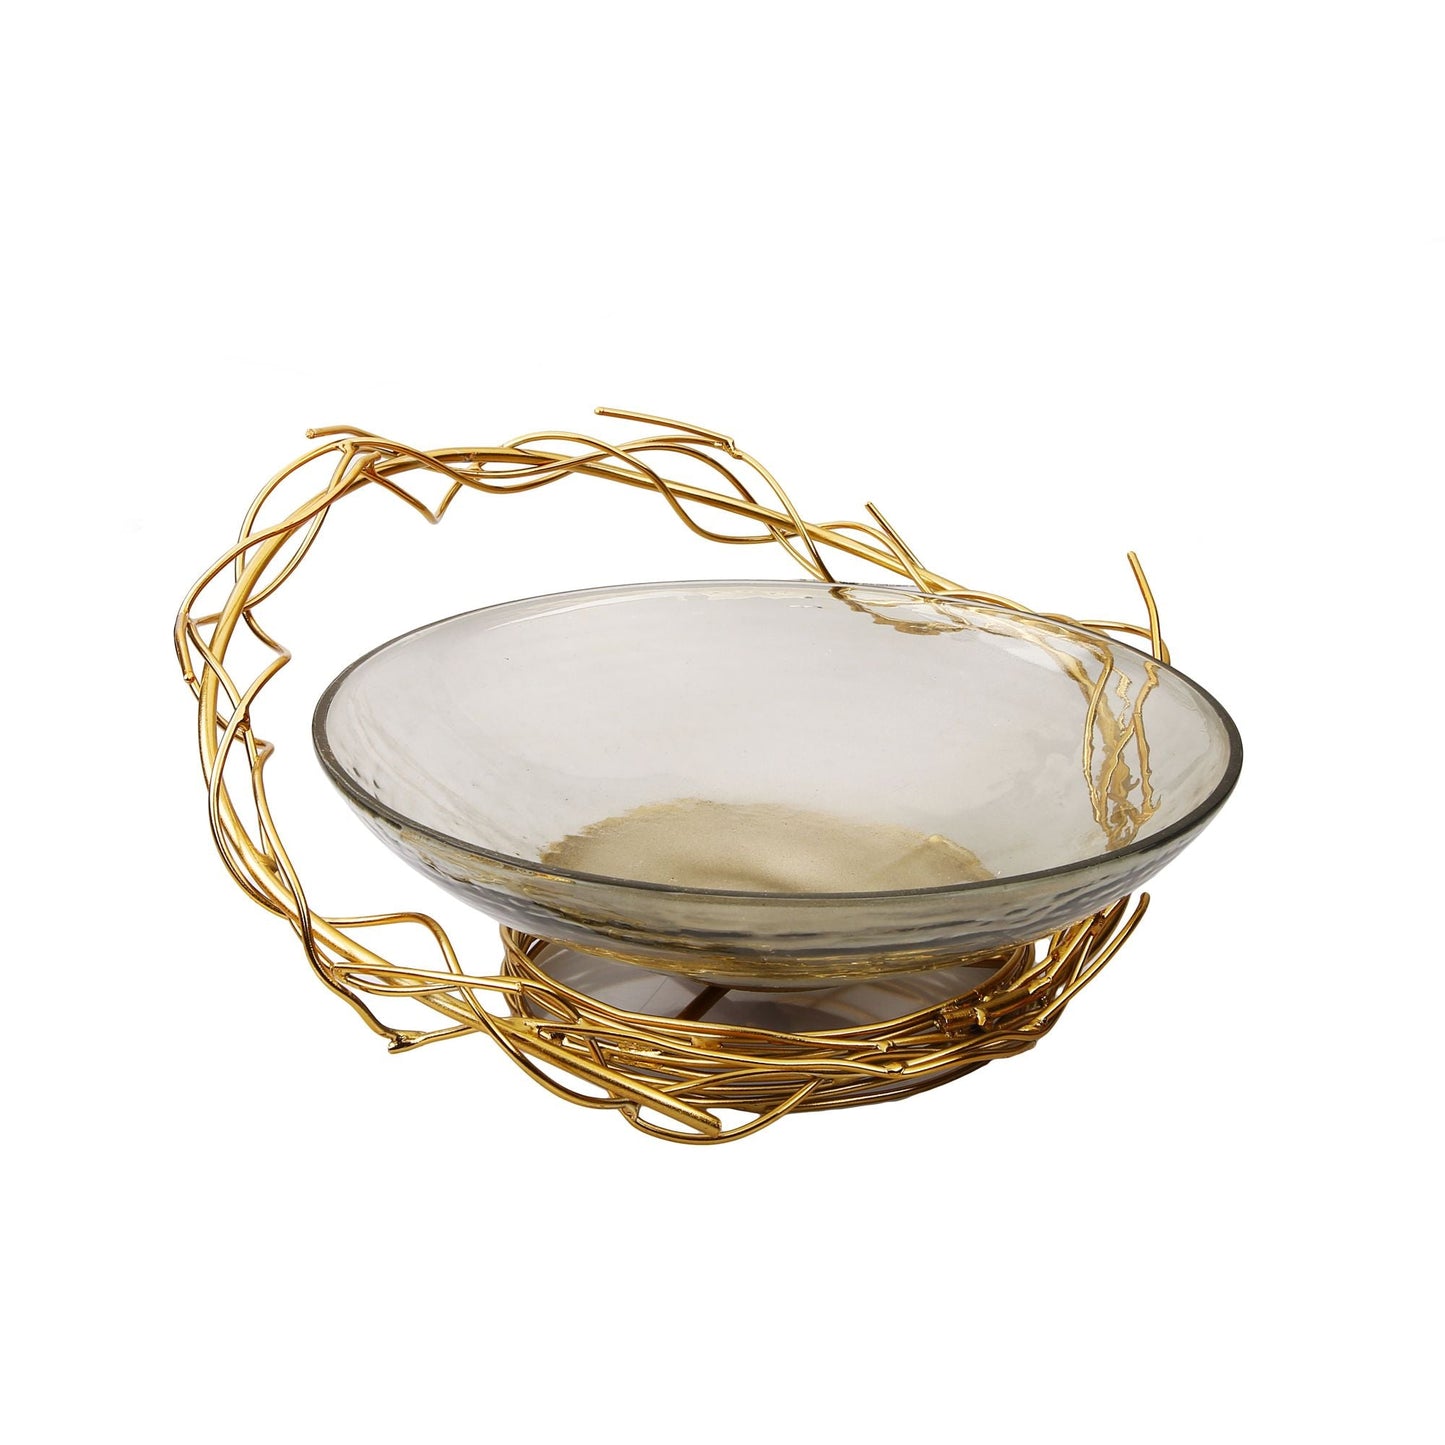 Classic Touch Smoked Glass Centerpiece Bowl With Gold Twig Design, 12.75"